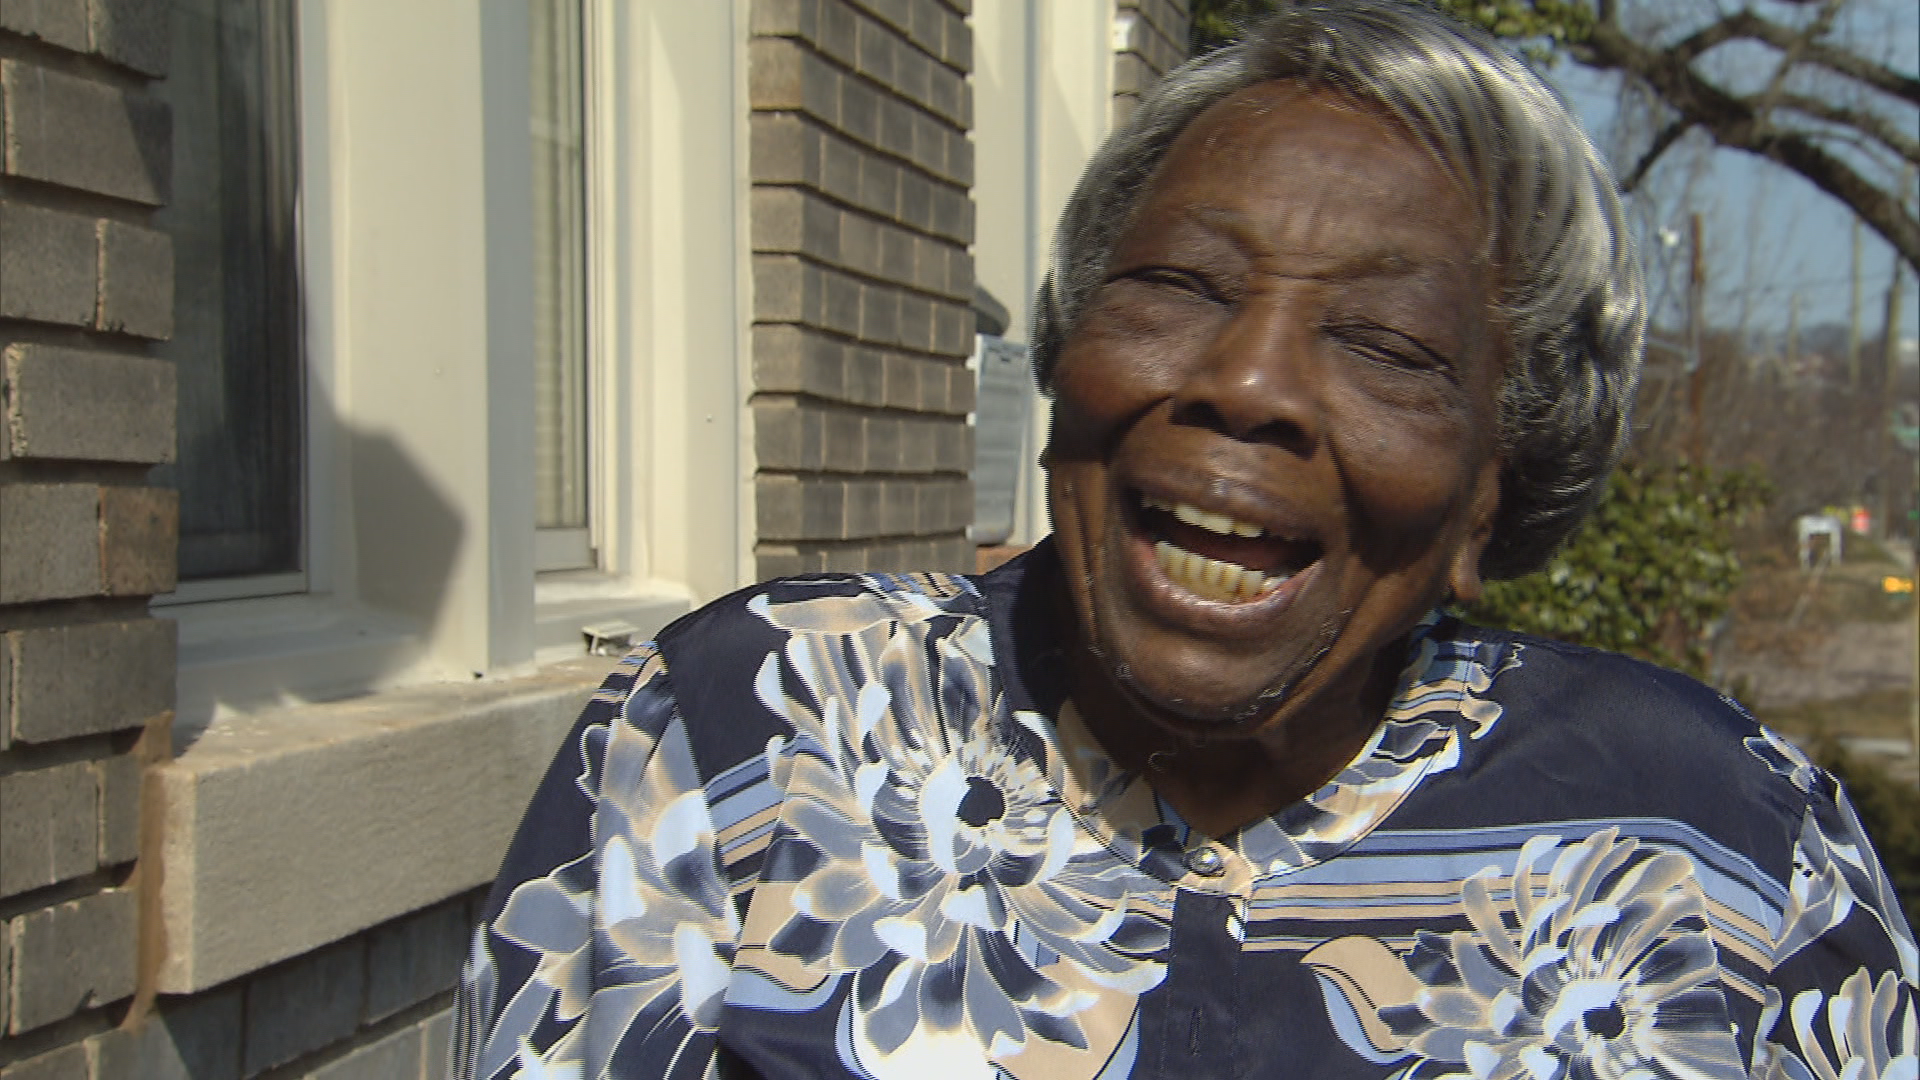 107 Year Old Woman Who Danced With Obamas Has Trouble Obtaining Photo Id Cbs News